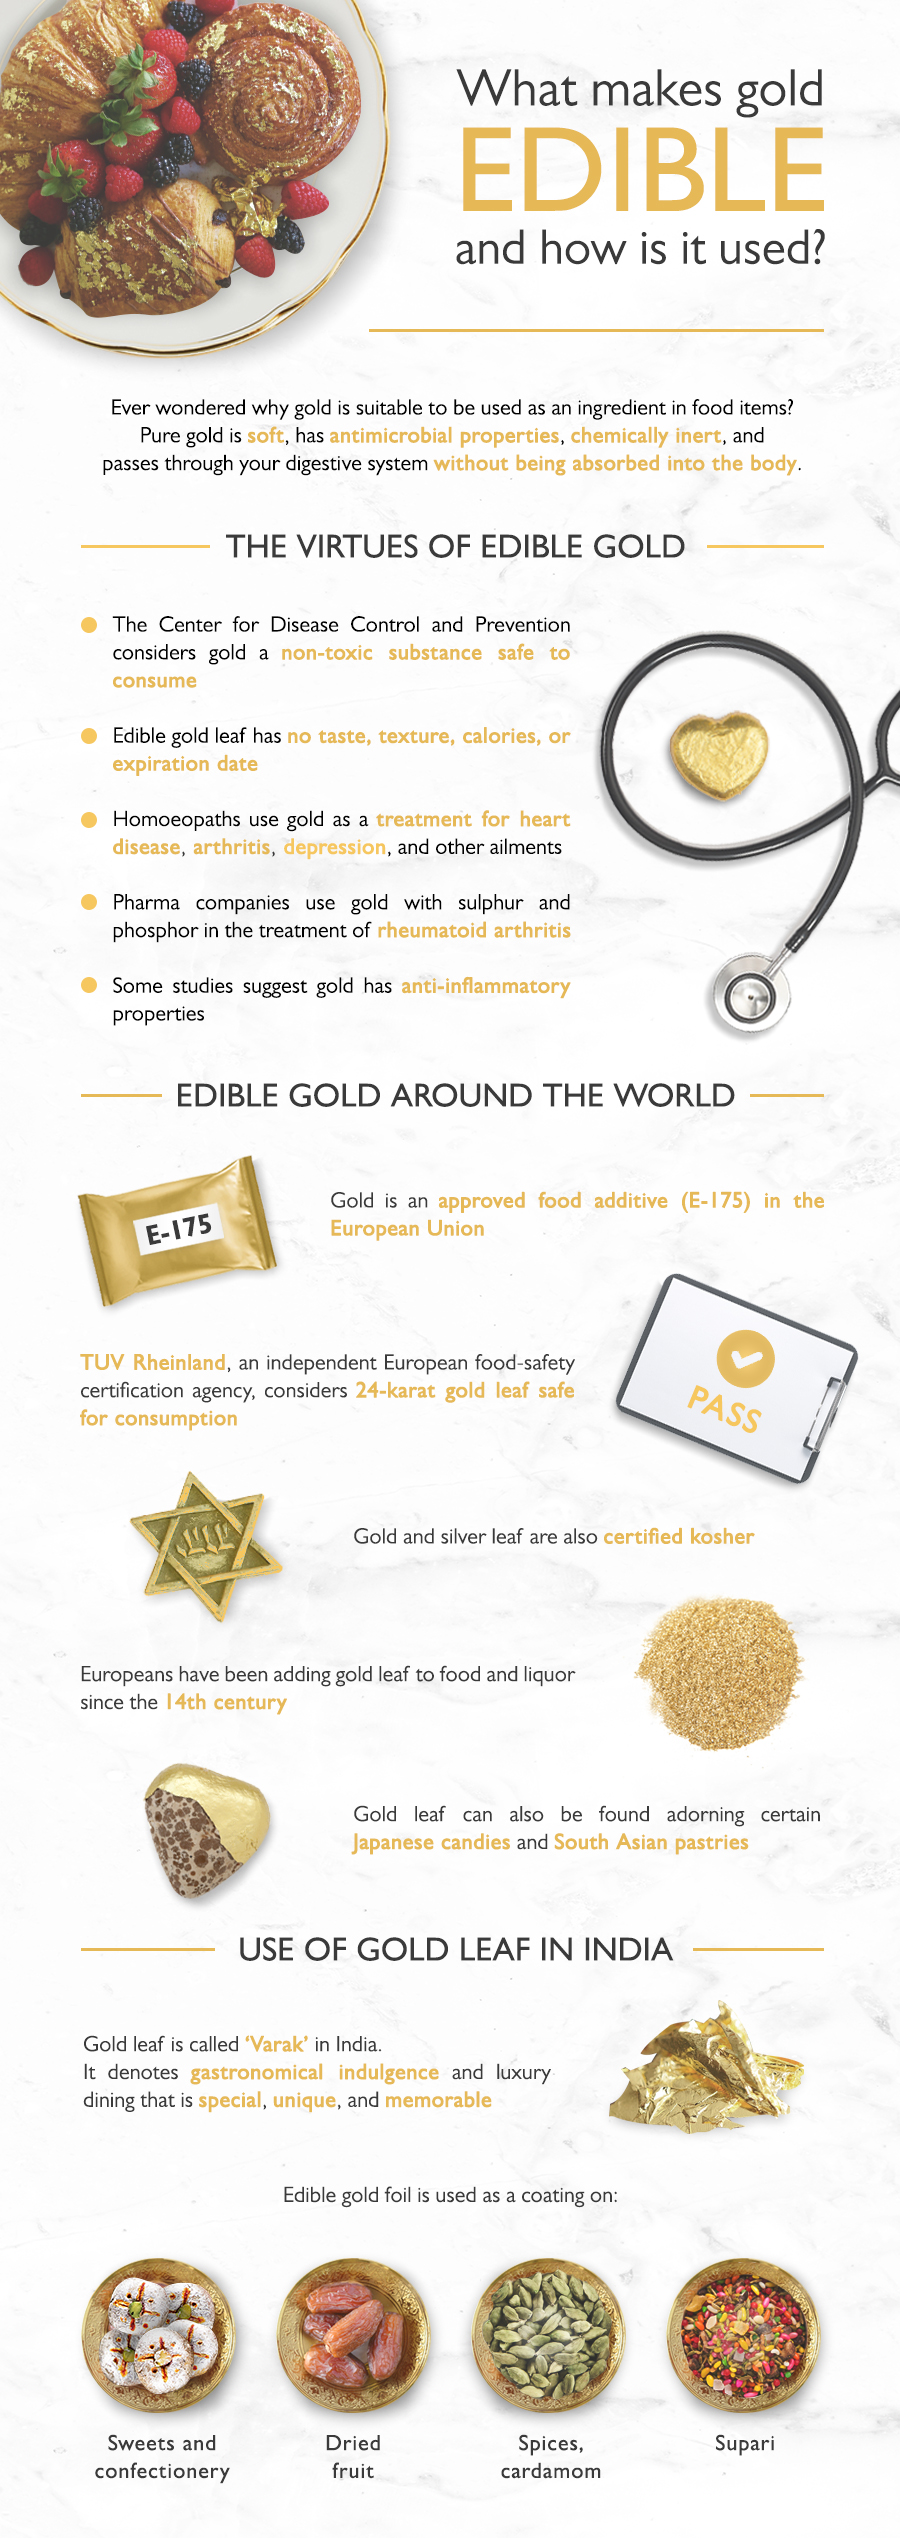 A close look at the health benefits of gold and why it's used in preparing many delicacies